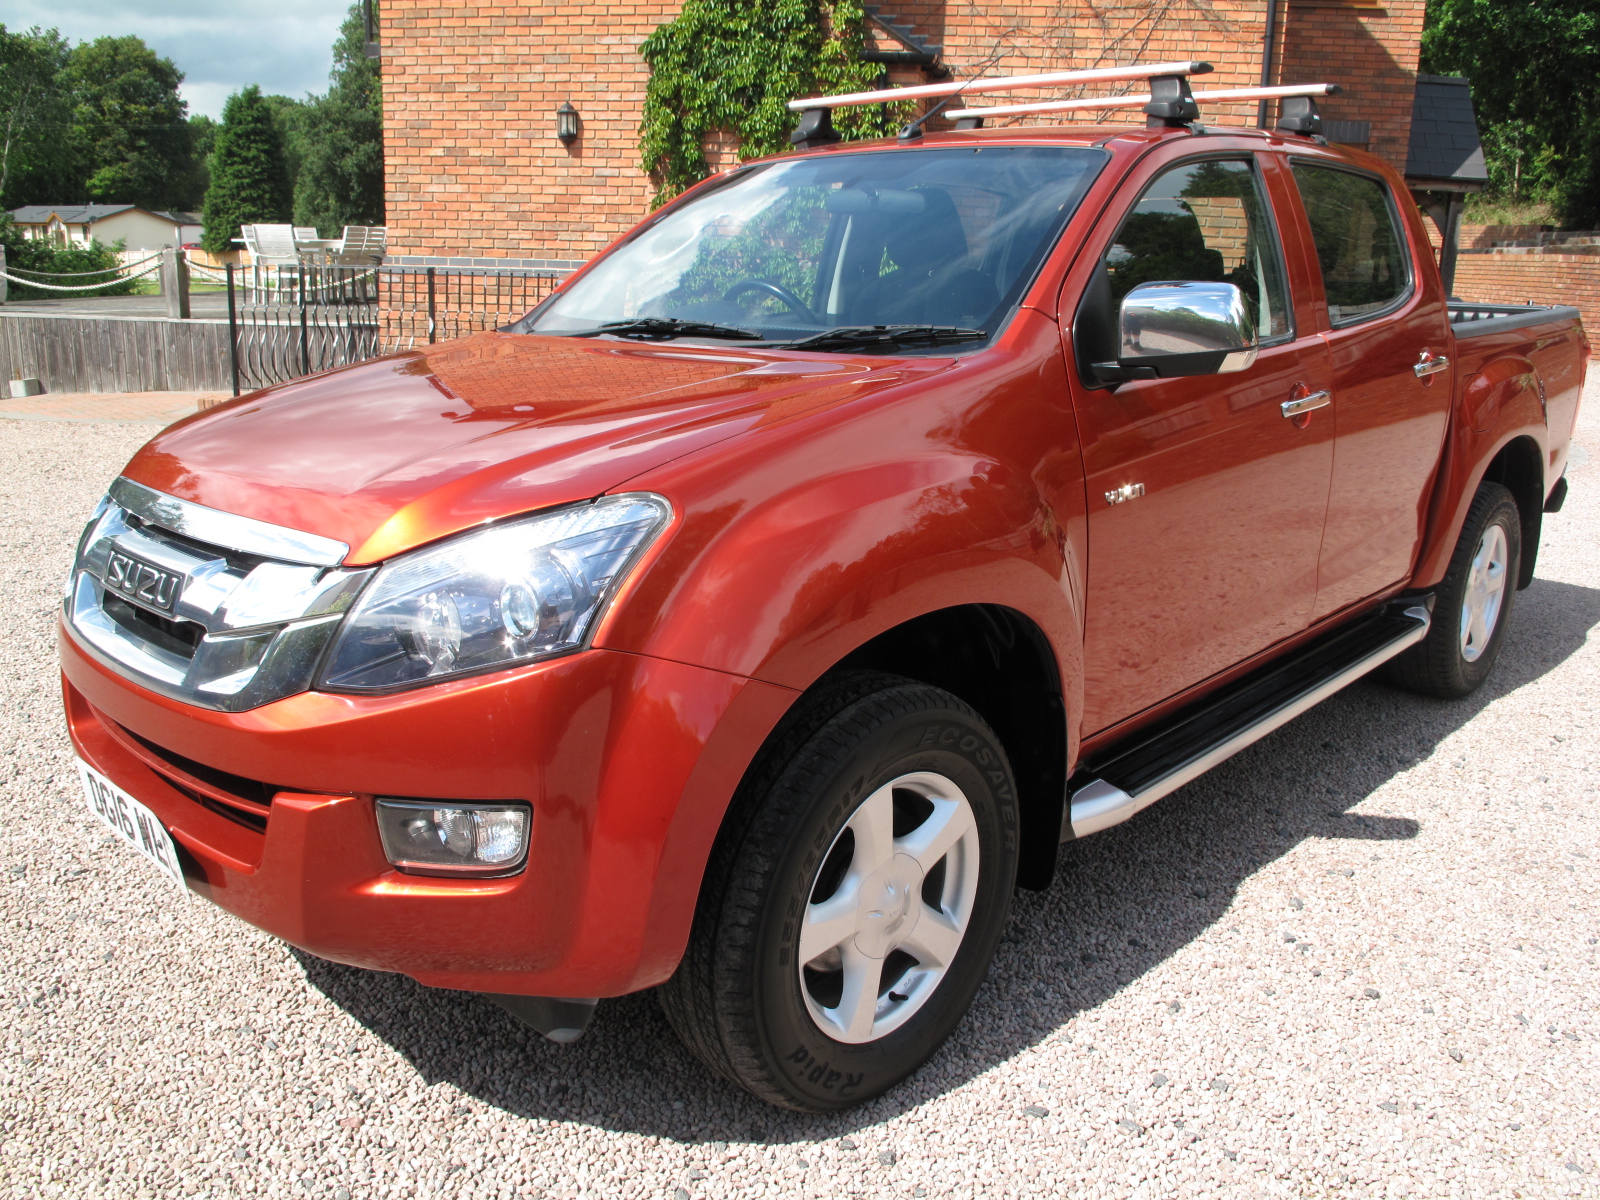 2016 16 ISUZU D-MAX 2.5 TD YUKON 4WD Double Cab 4 Door ABSOLUTELY STUNNING TRUCK! NO VAT! 1 PREVIOUS OWNER SOLD! full